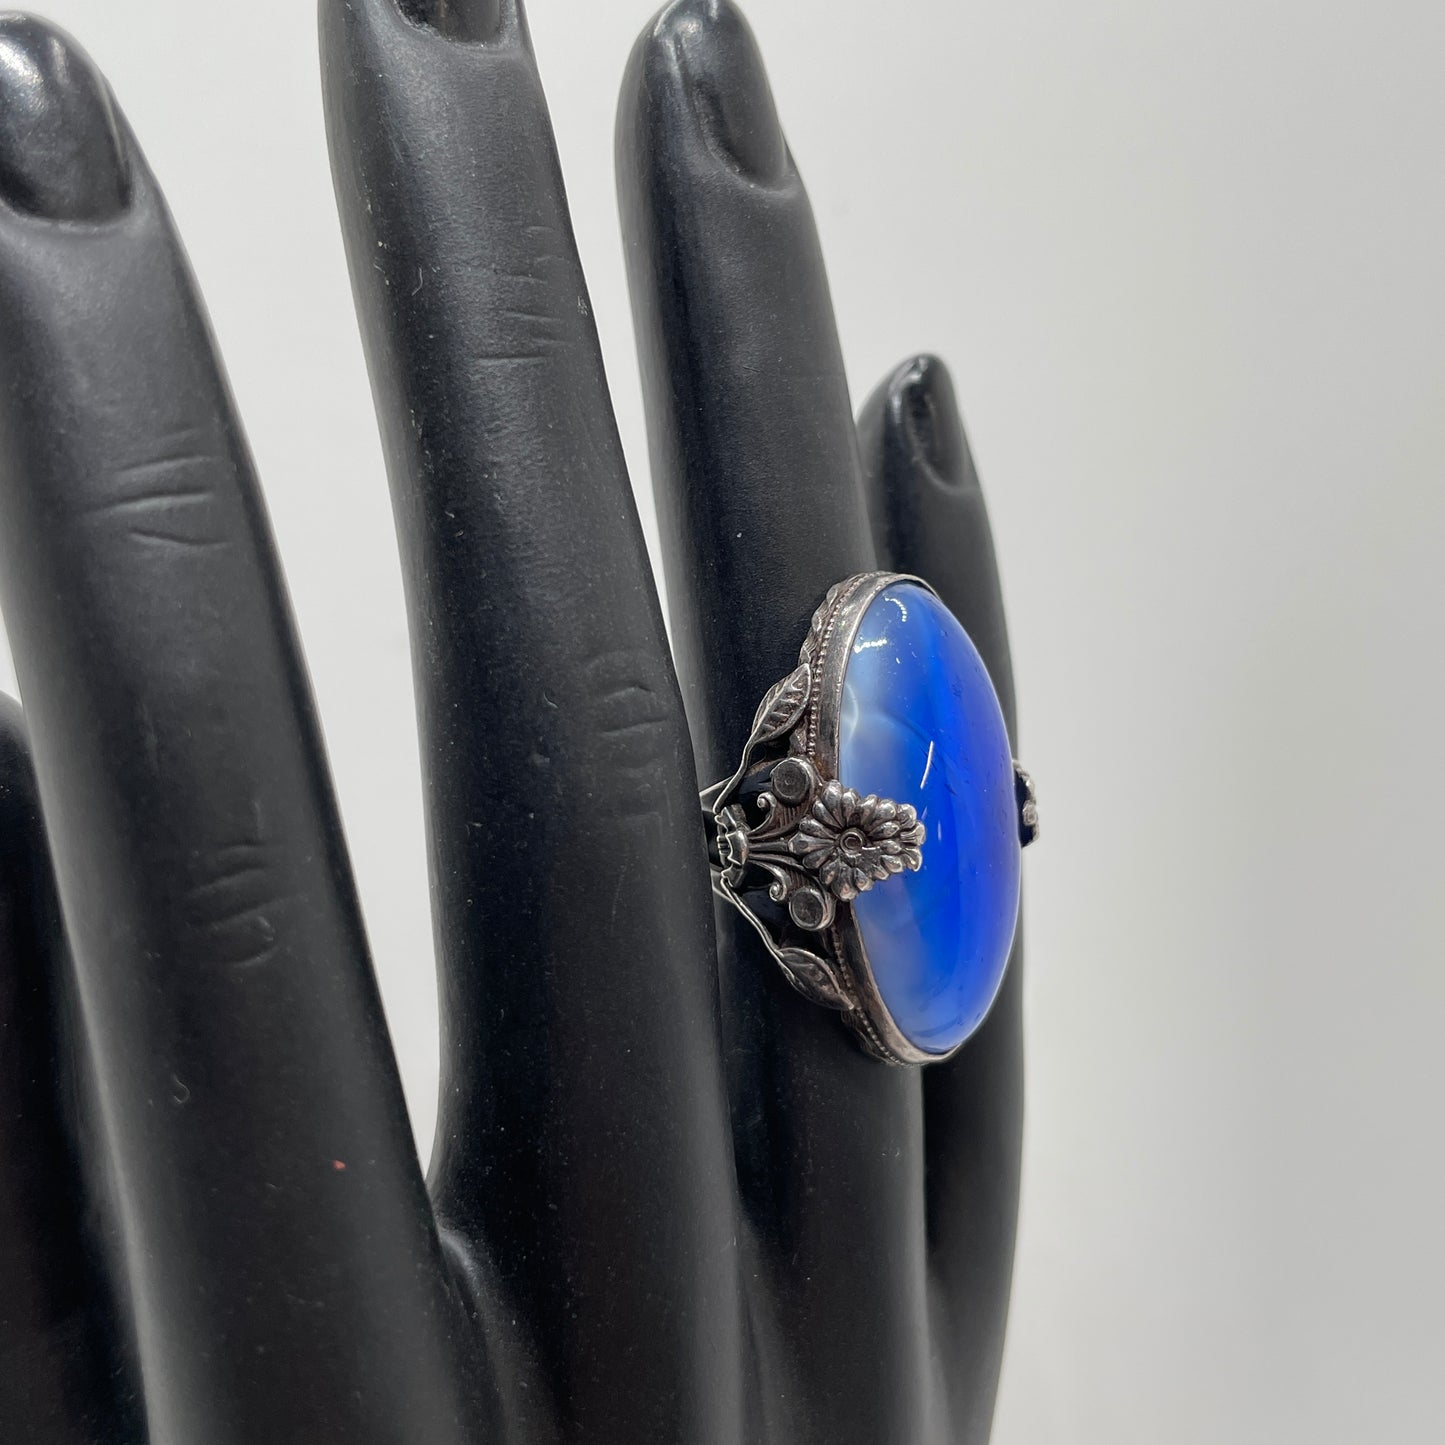 Vintage Sterling Silver & Large Blue Stone Ring - Size 5